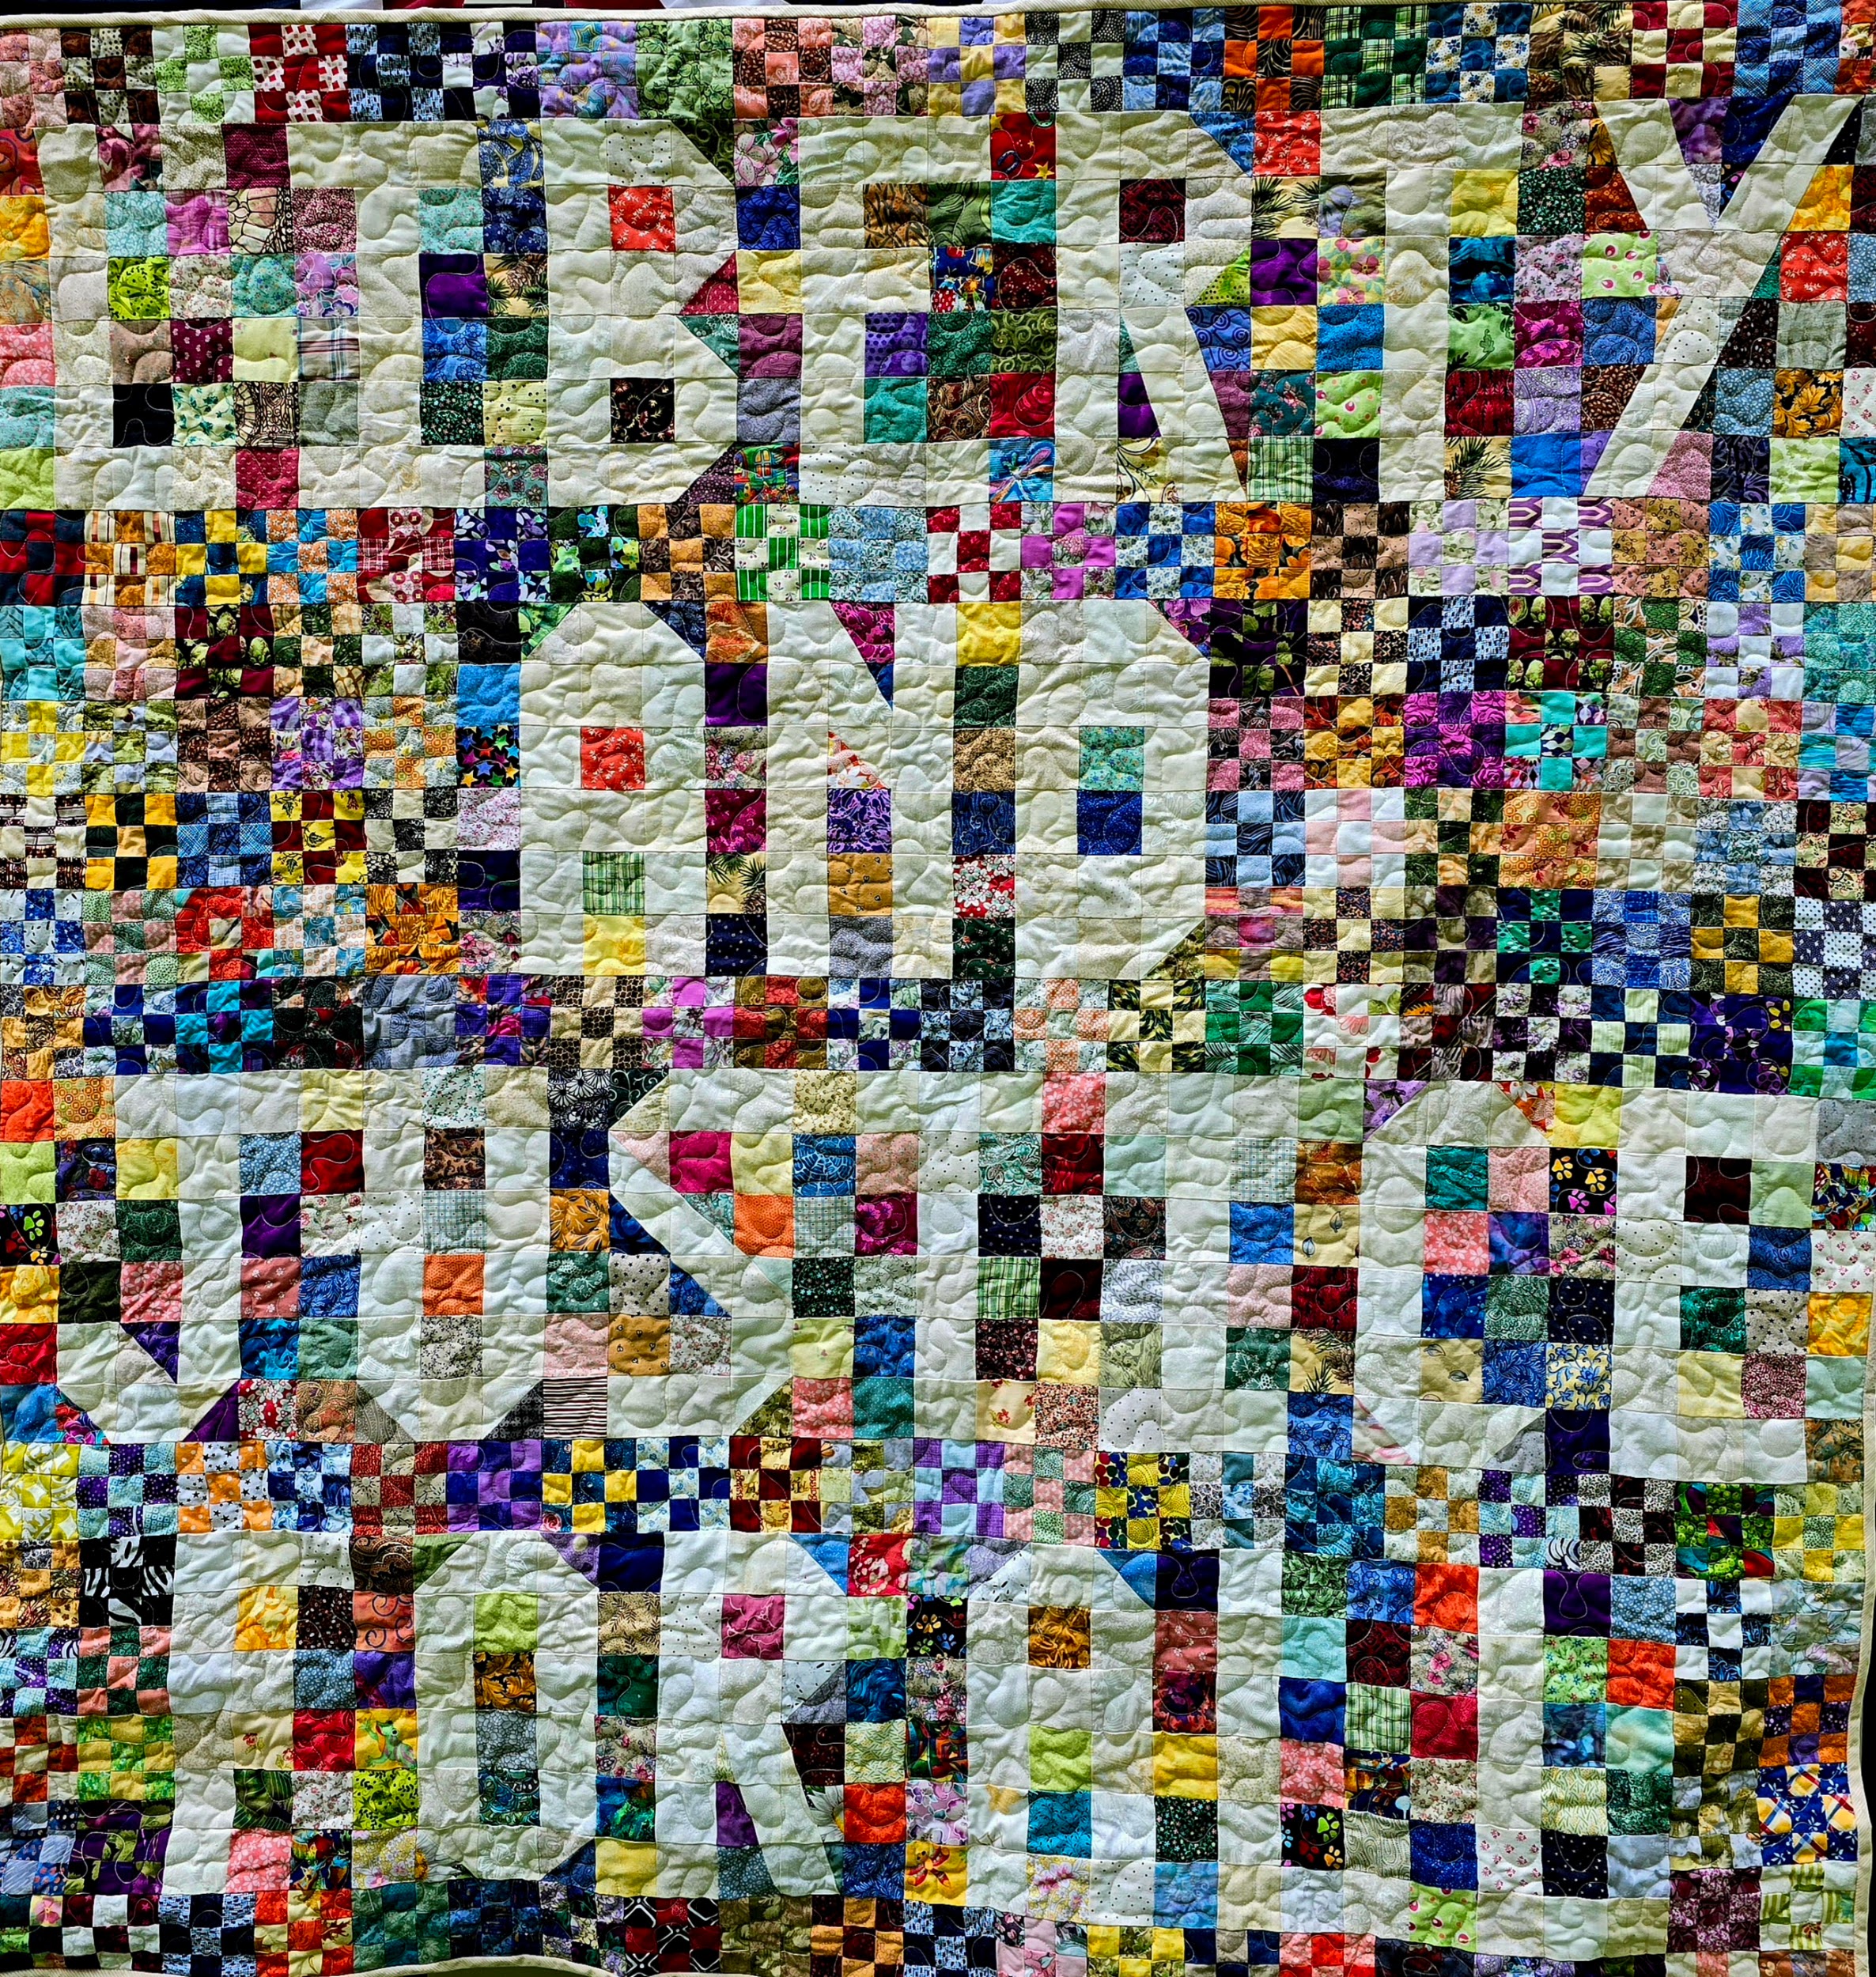 Patchwork quilt which says LIBERTY AND JUSTICE FOR ALL